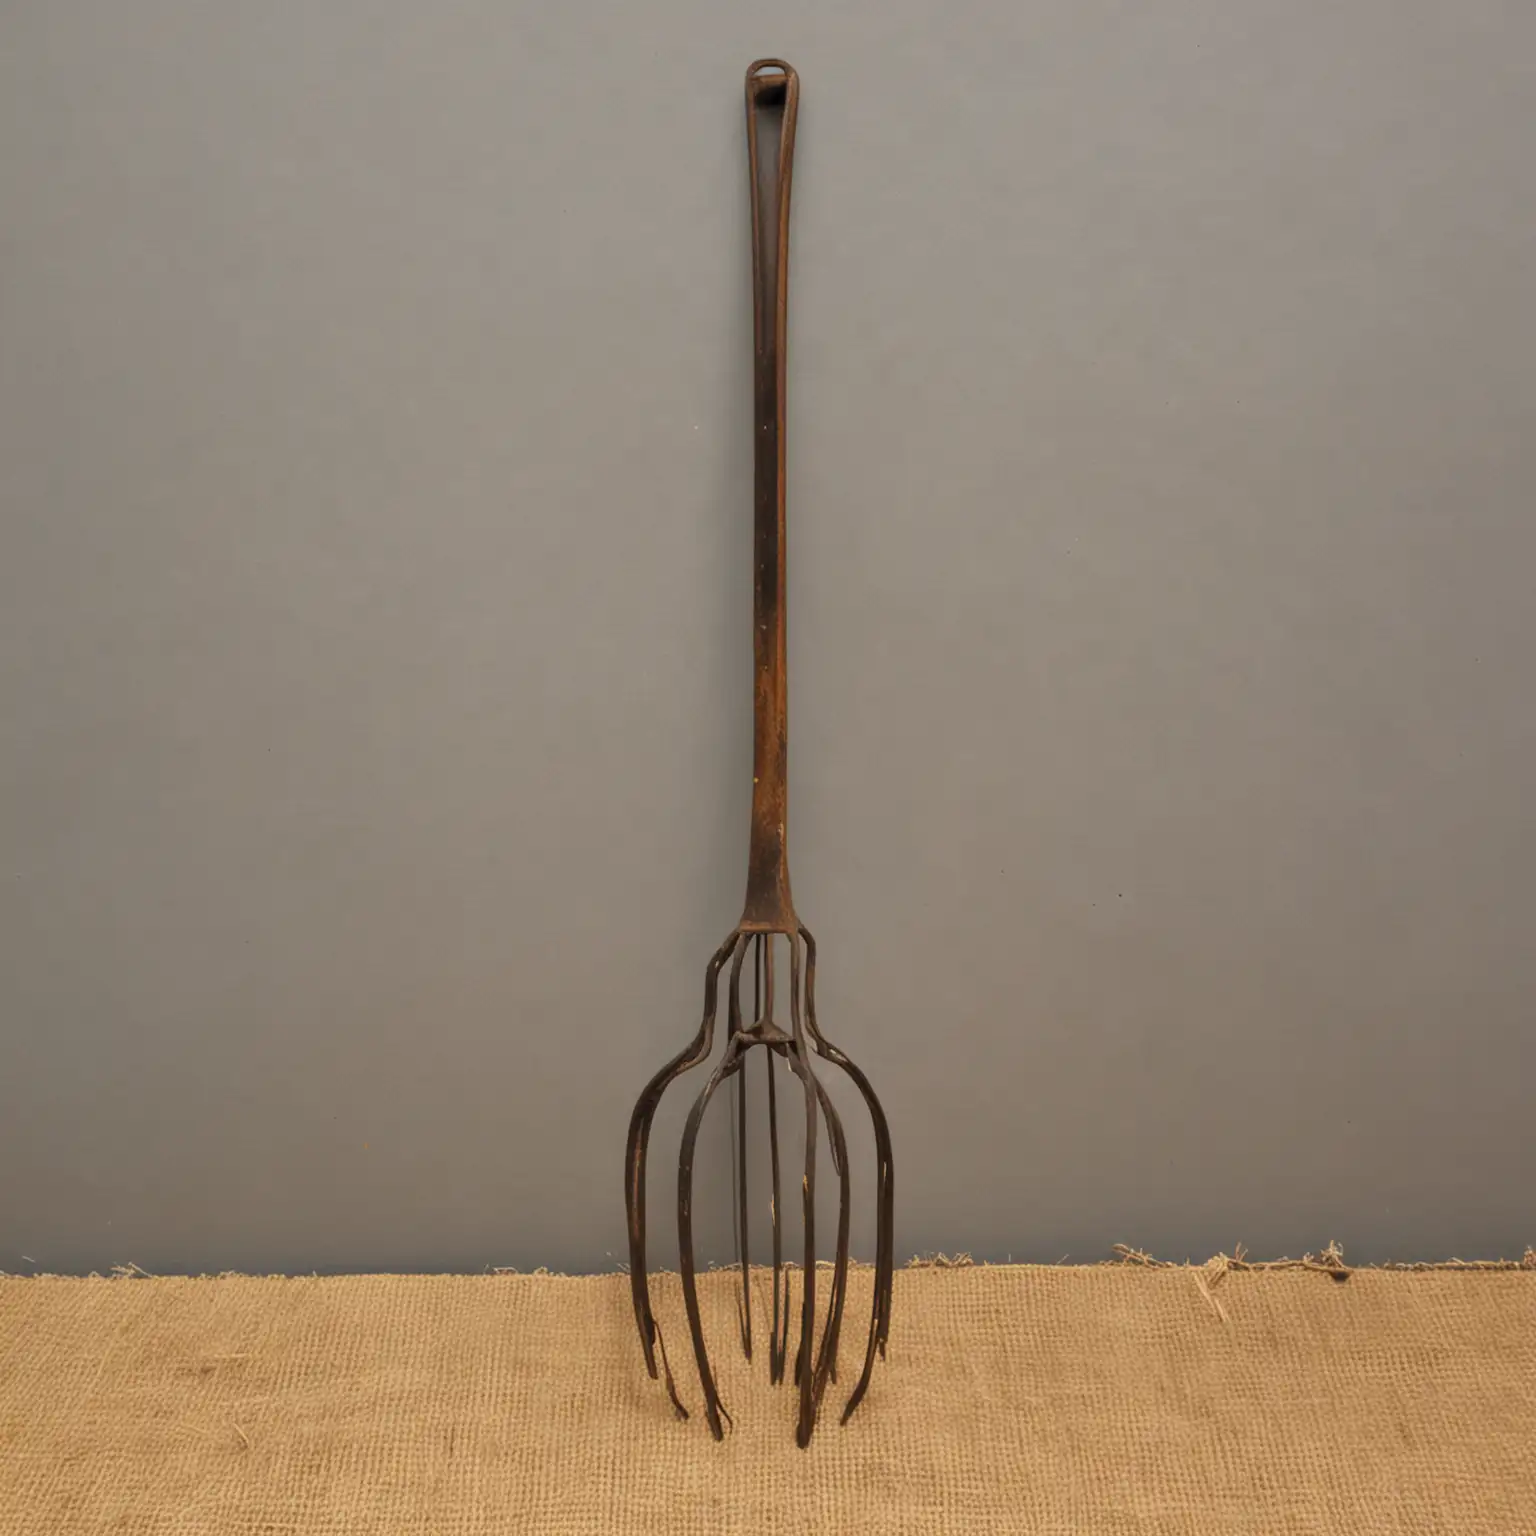 Early 19th Century Hay-Burning-Hay-fork in full lenght